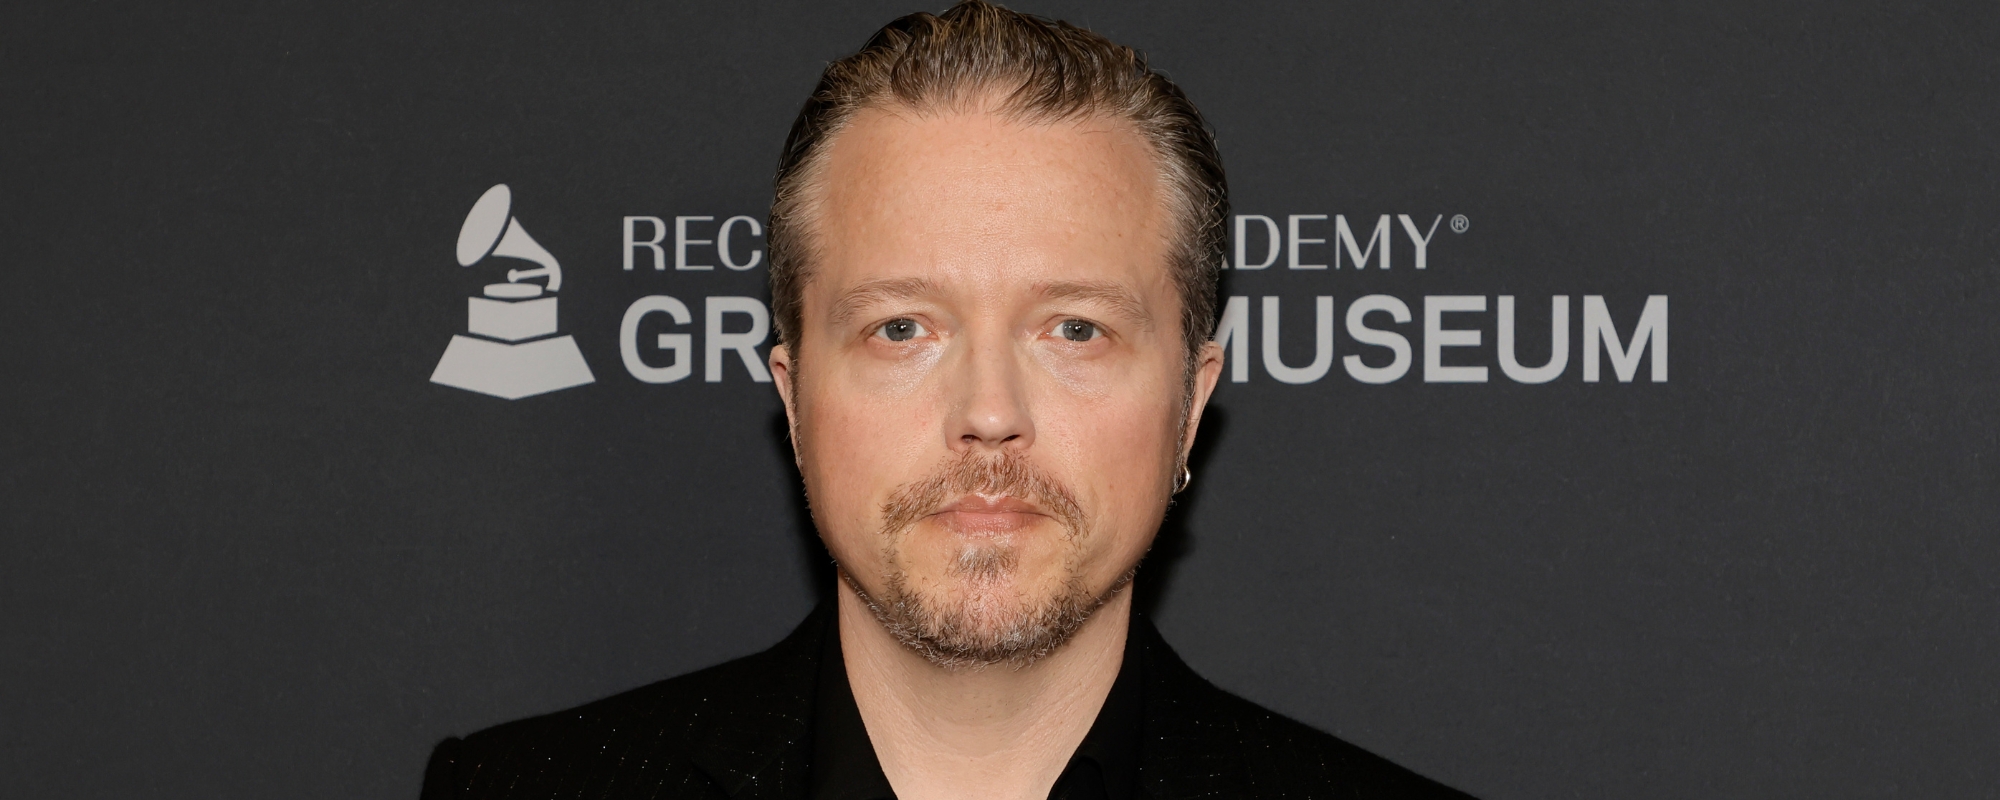 Jason Isbell’s Black Friday Tweet Has Fans Sounding off with Their Retail Horror Stories